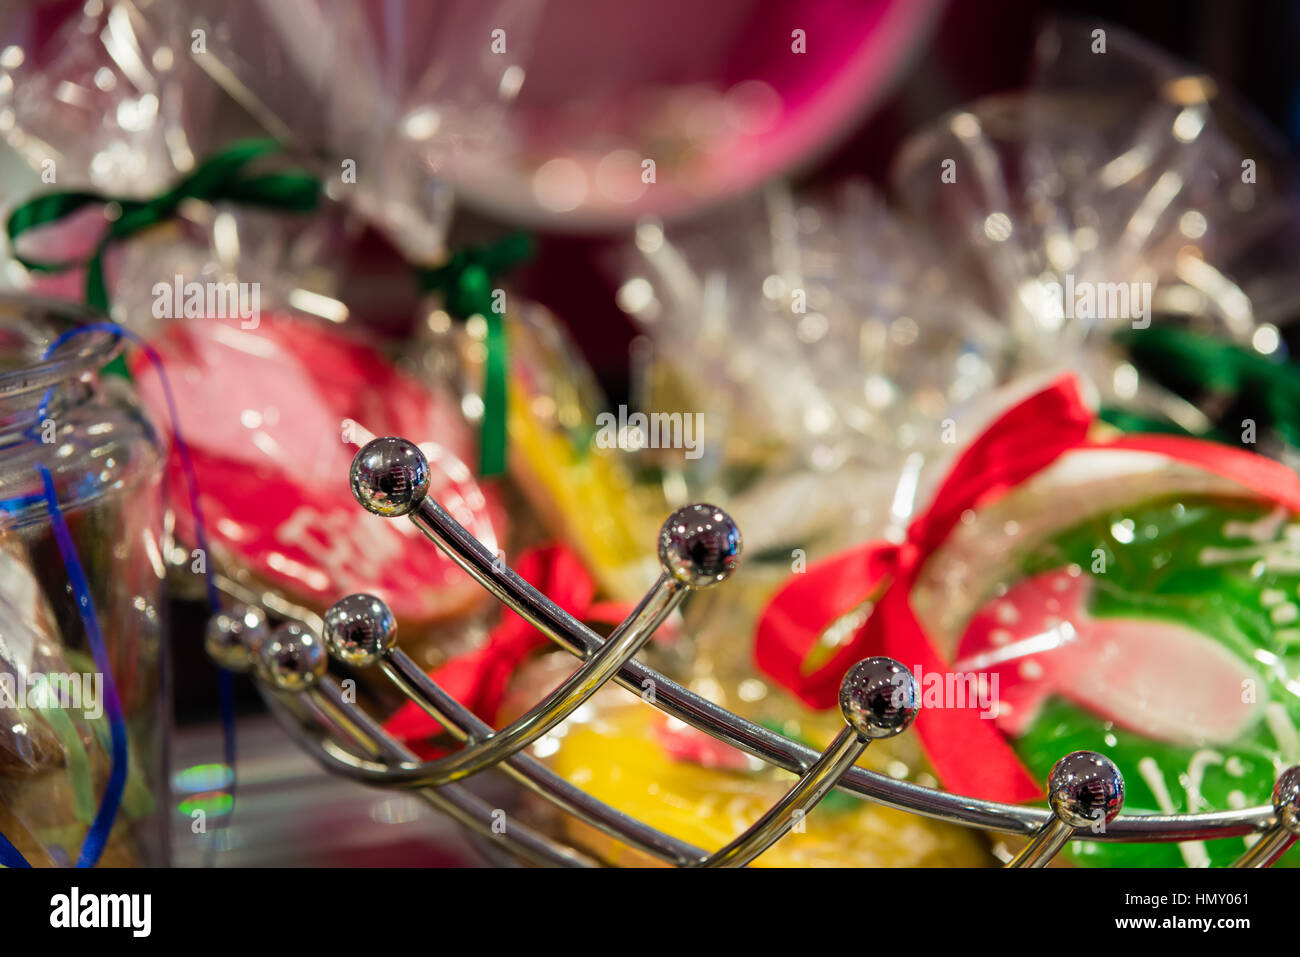 ESSEN, GERMANY - JANUARY 25, 2017: Lovely colors in a candy store attract buyers and visitors Stock Photo